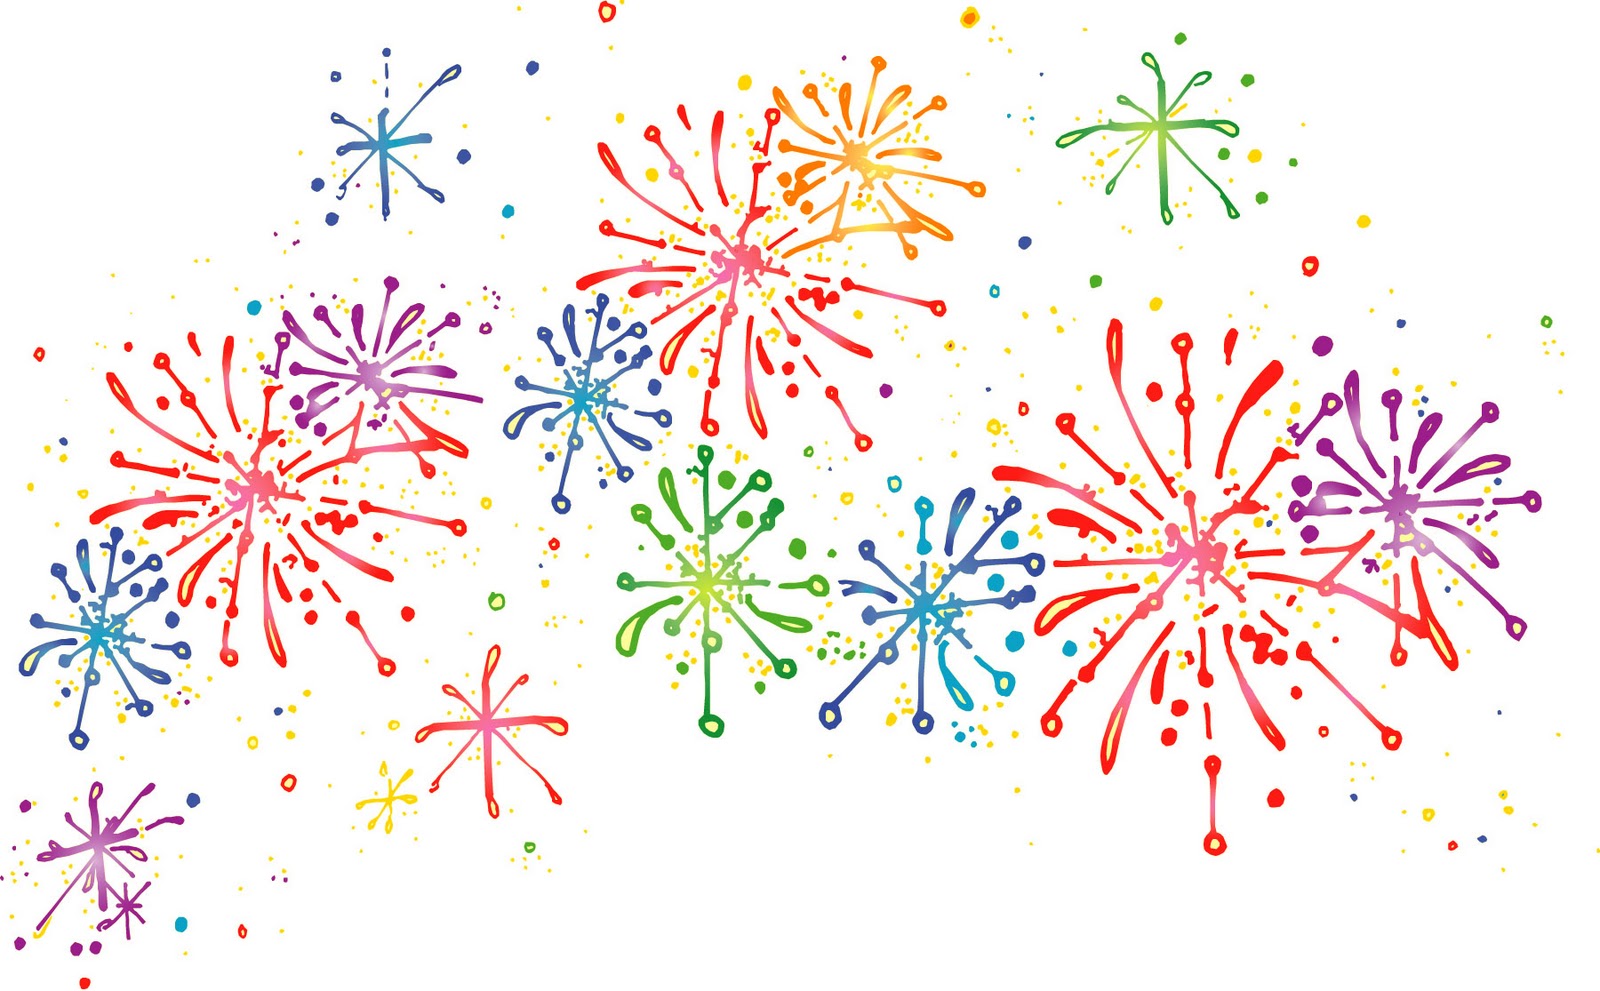 Free Fireworks Border Cliparts, Download Free Clip Art, Free